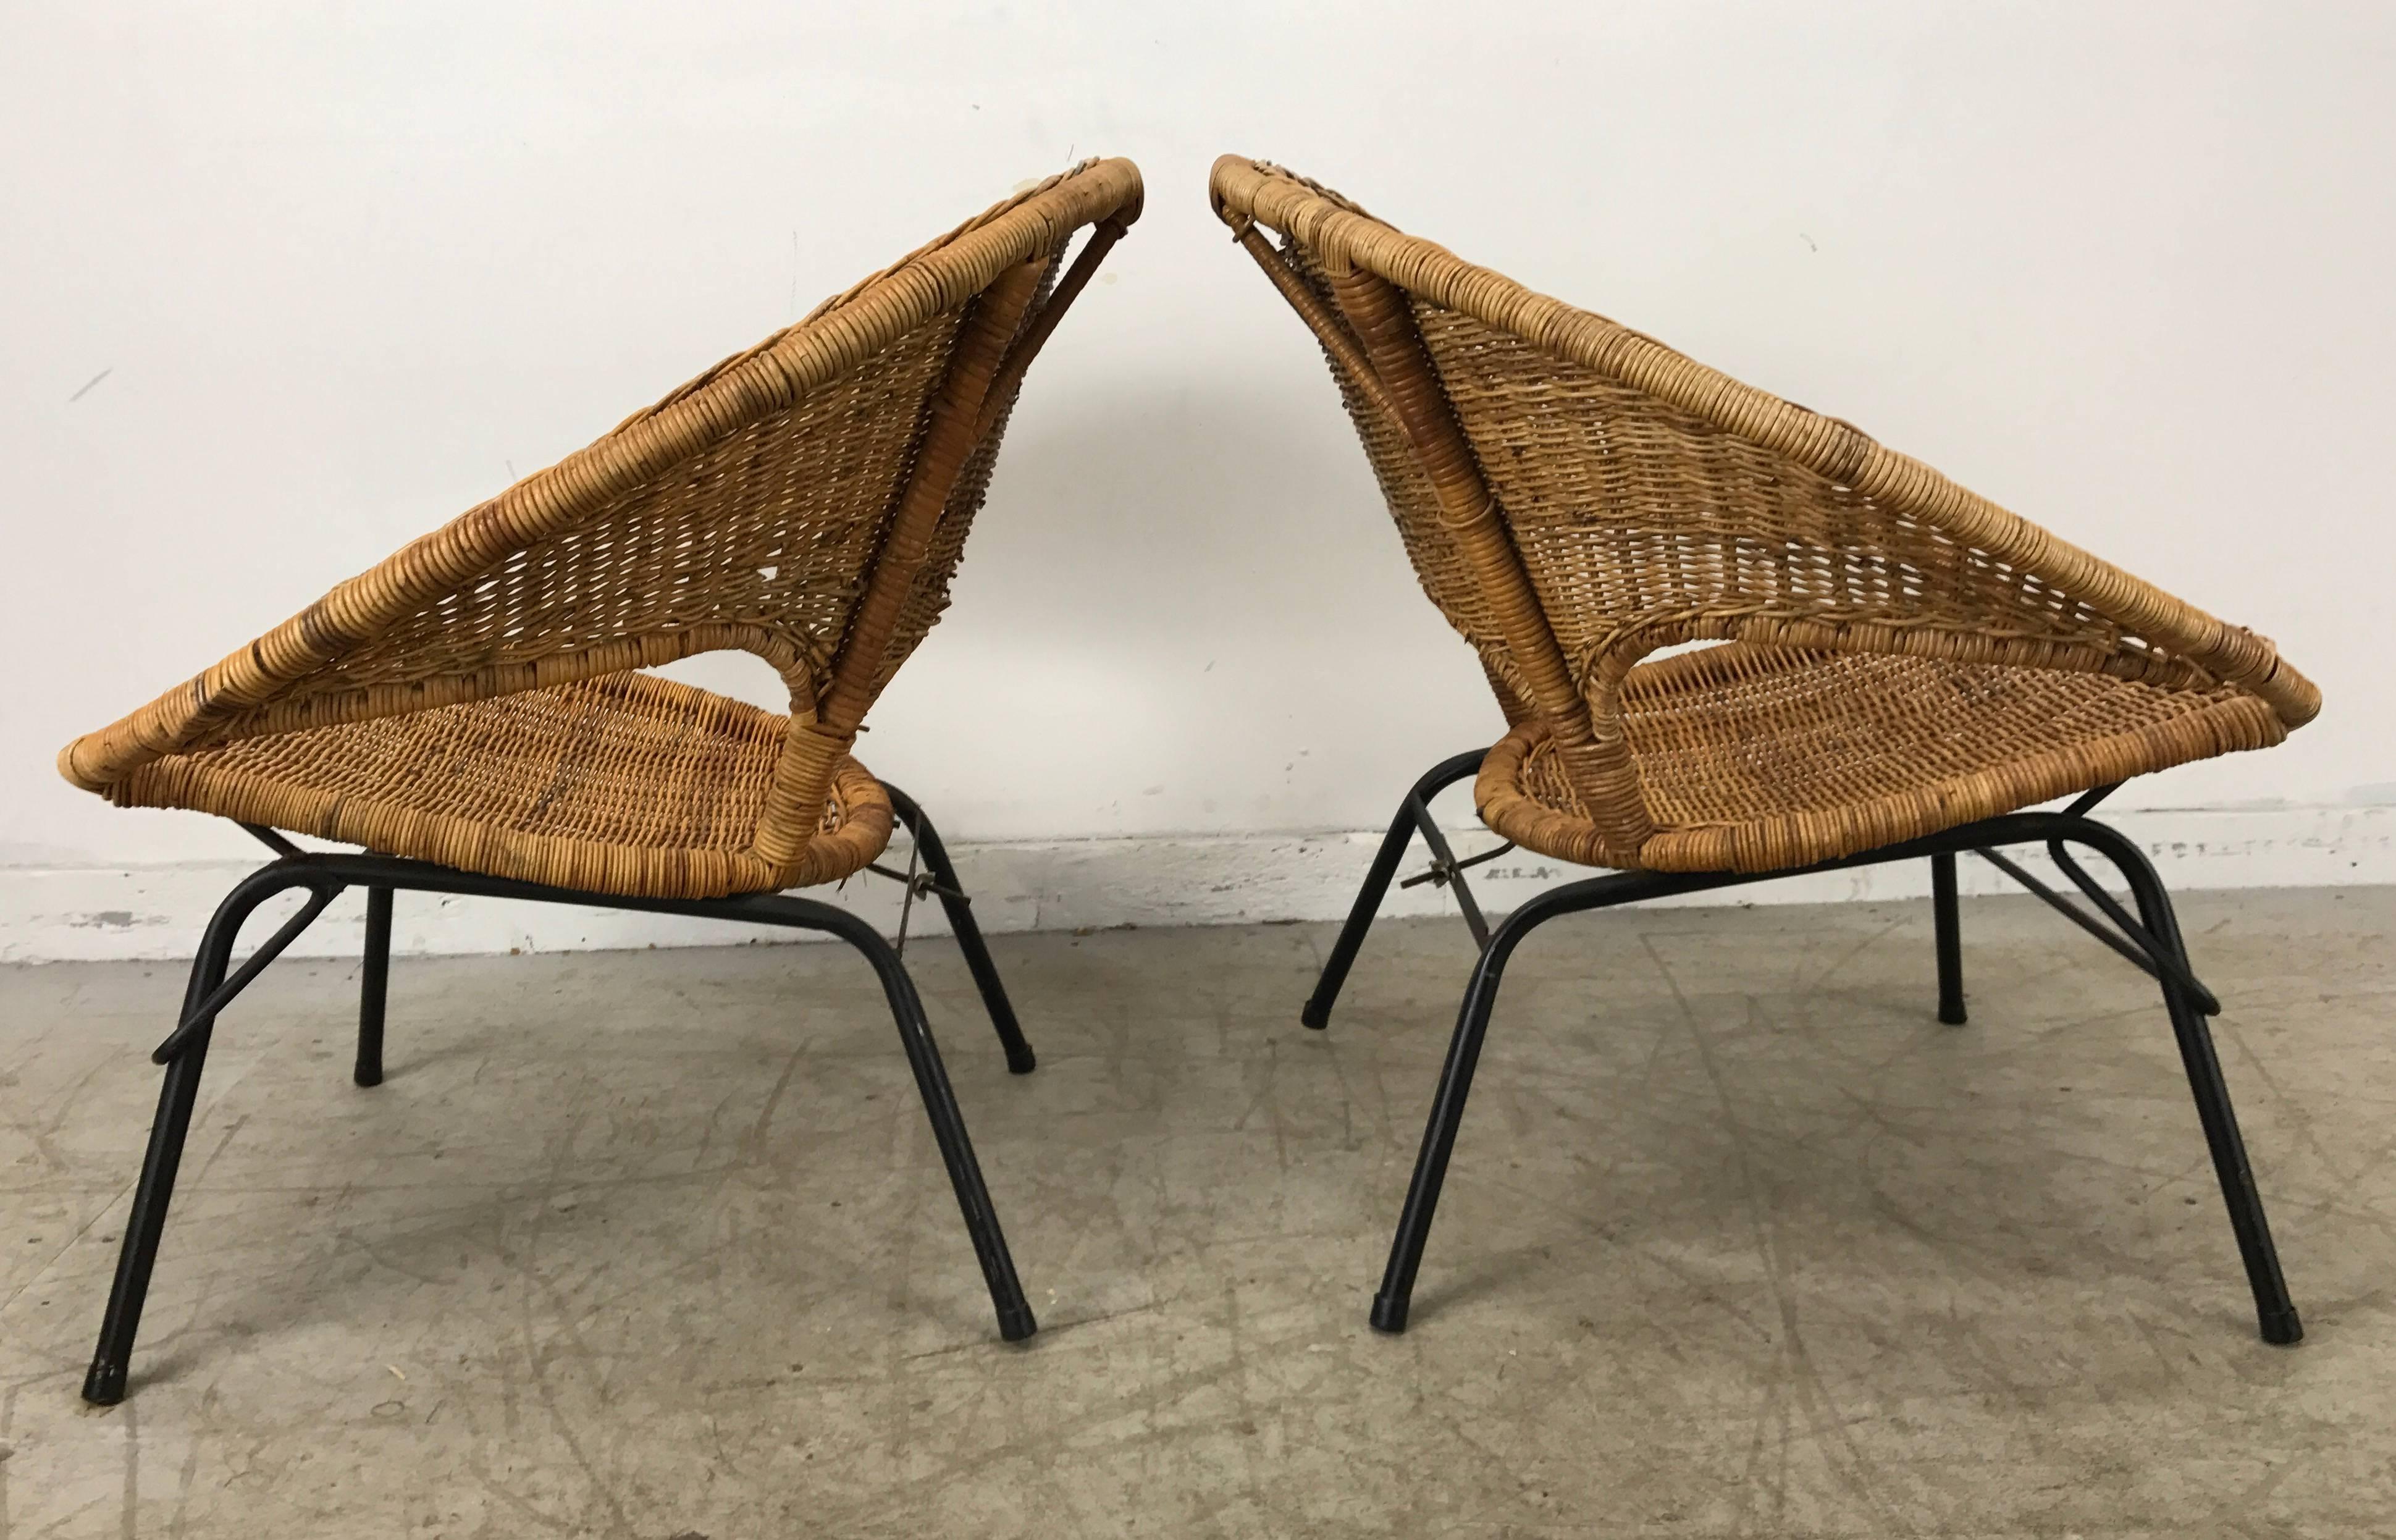 Modernist Wicker and Iron Hoop Chairs by Franco Albini 1